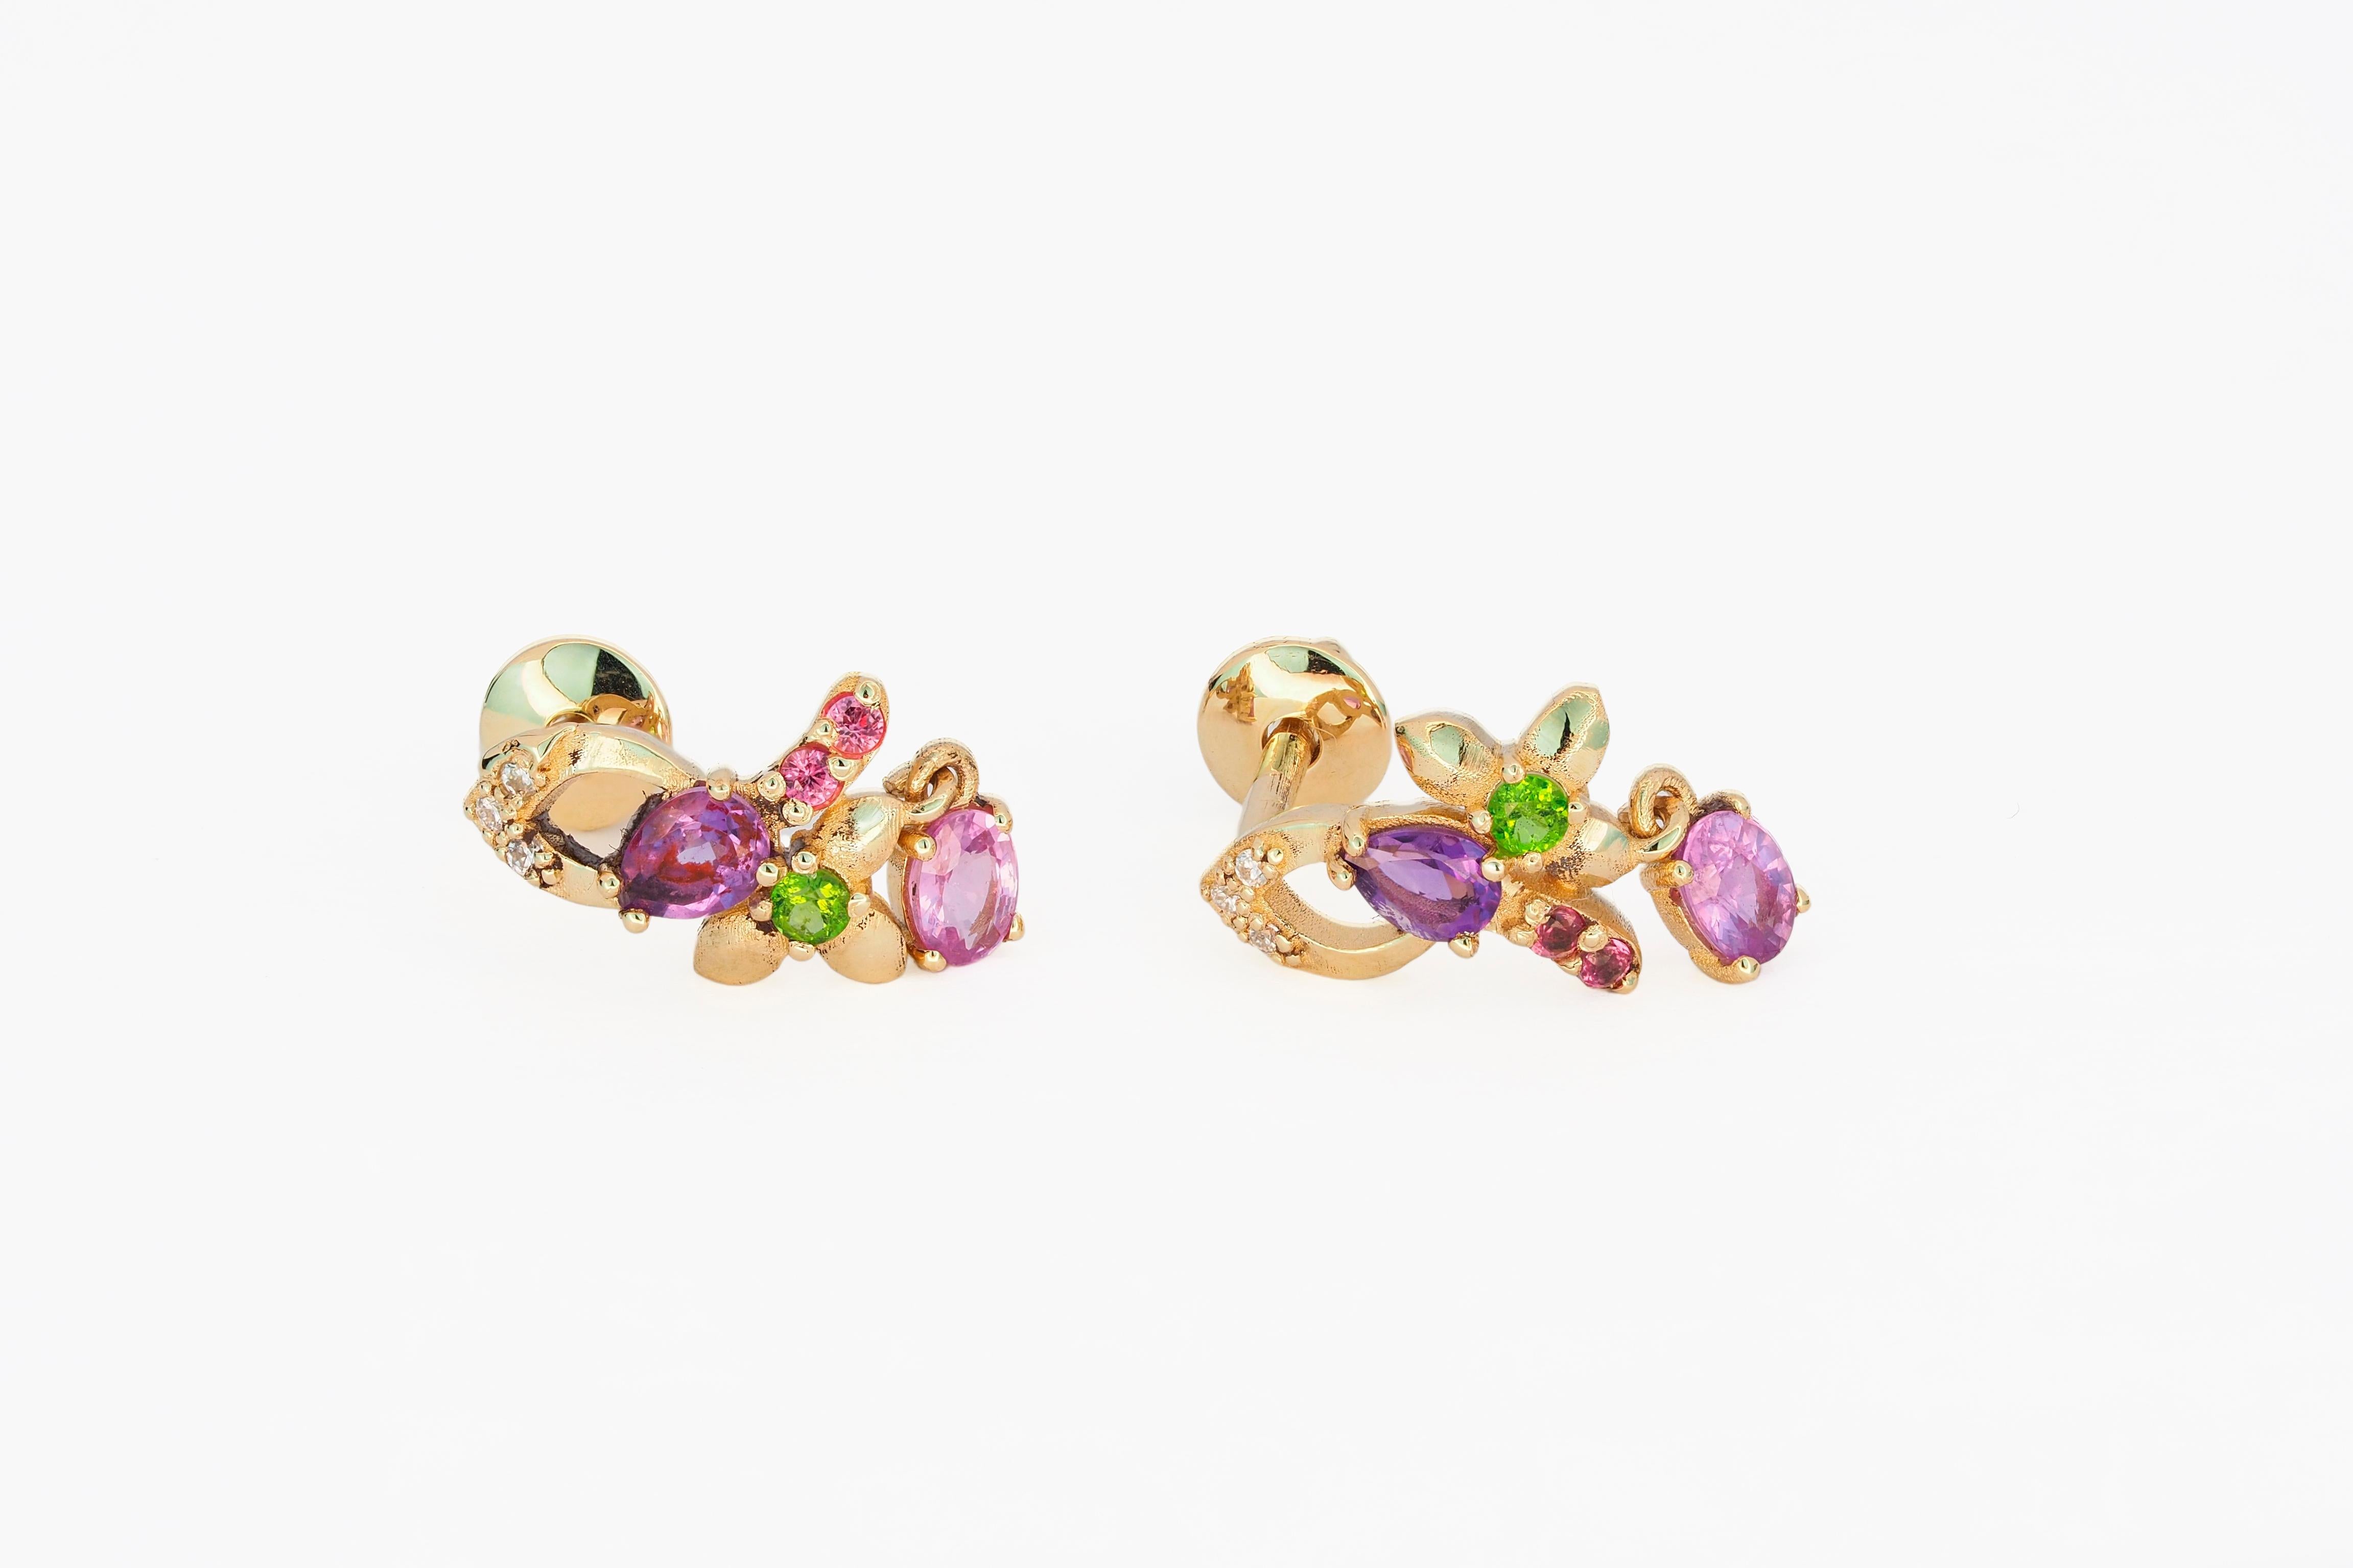 Pear Cut 14 Karat Gold Earrings Studs with Sapphires and Multicolores Gemstones For Sale